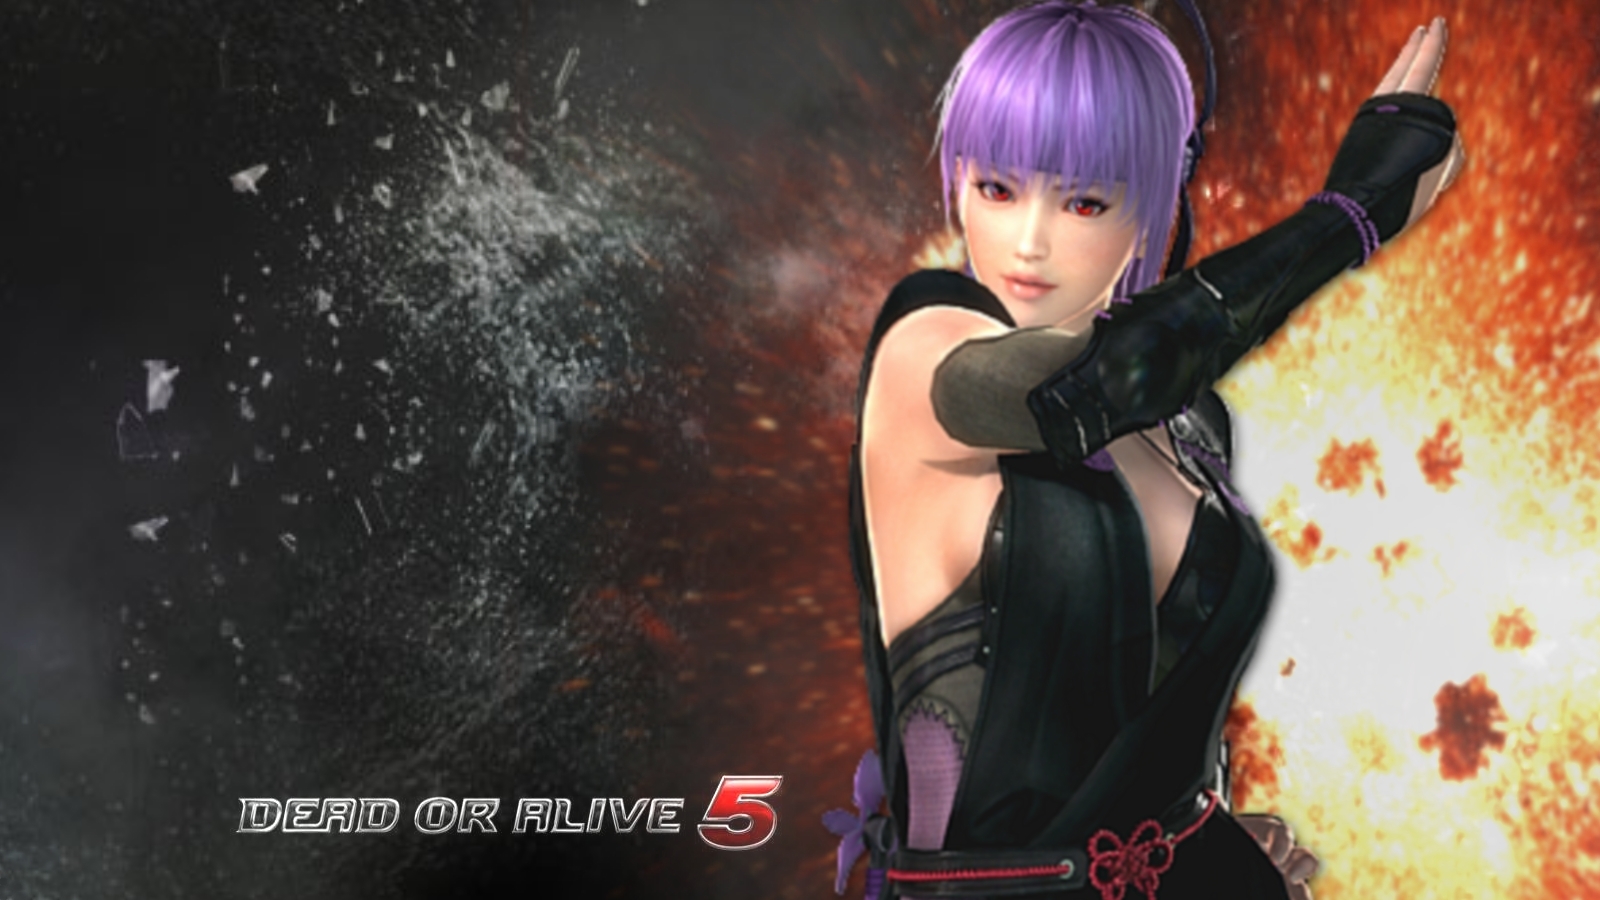 100 Dead Or Alive 5 Wallpapers On Wallpapersafari